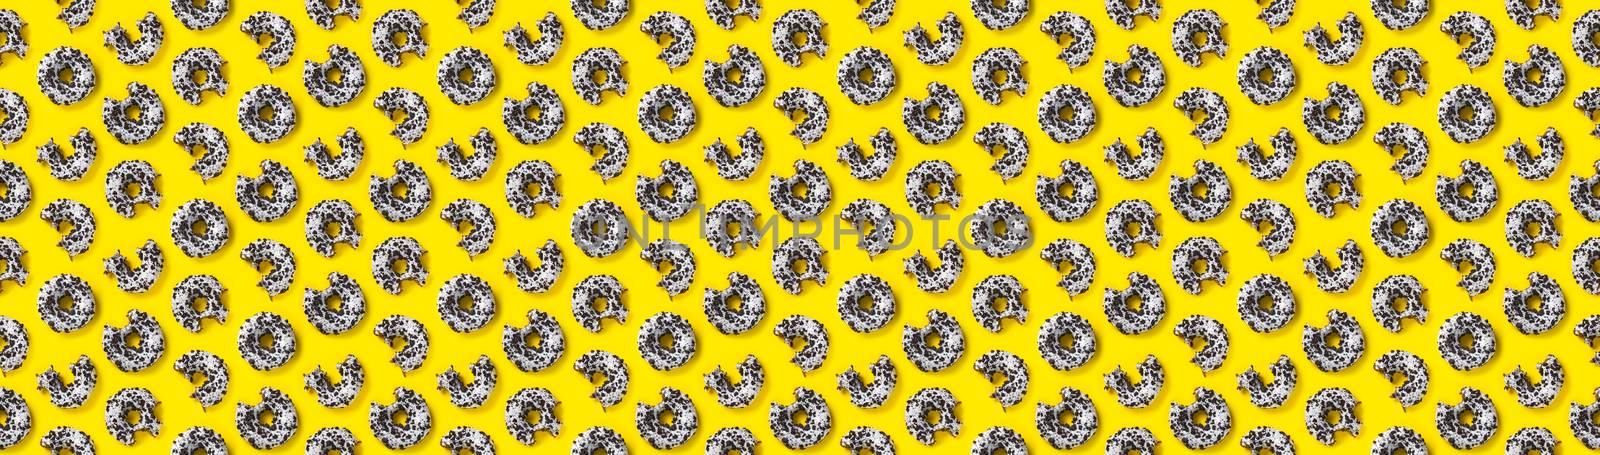 donuts on a yellow banner background top view. Flat lay of delicious nibbled chocolate donuts. used as donut banner or poster background, not pattern